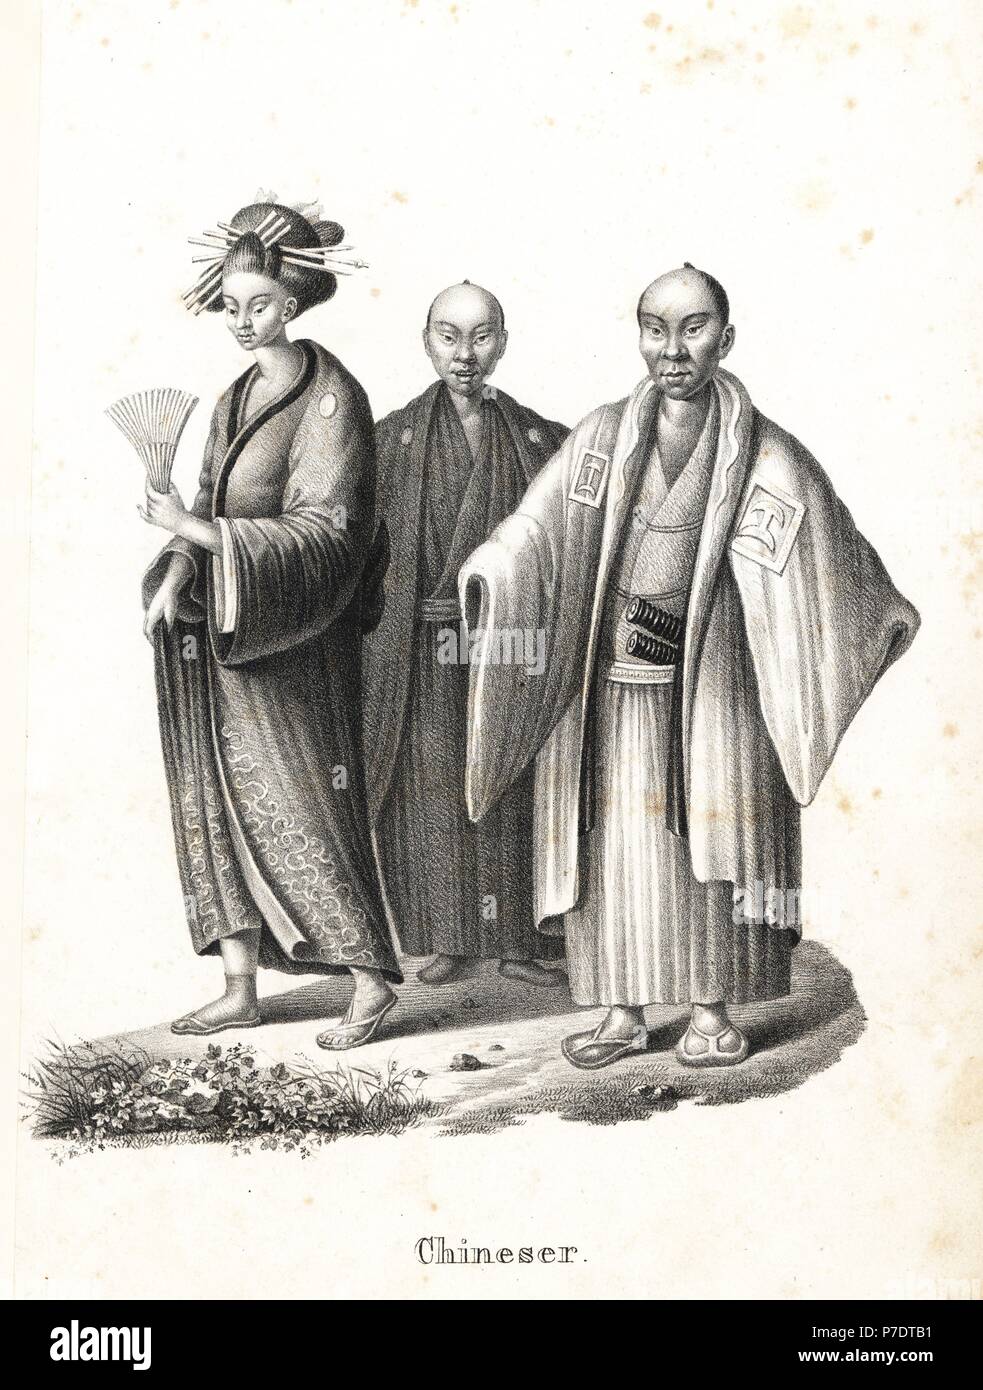 Japanese oiran and samurai. Japanese courtesan in kimono with fan and hair  ornaments, and two Japanese samurai in chonmage hairstyle wearing montsuki  over hakama with two swords (katana) in their belts. (Titled